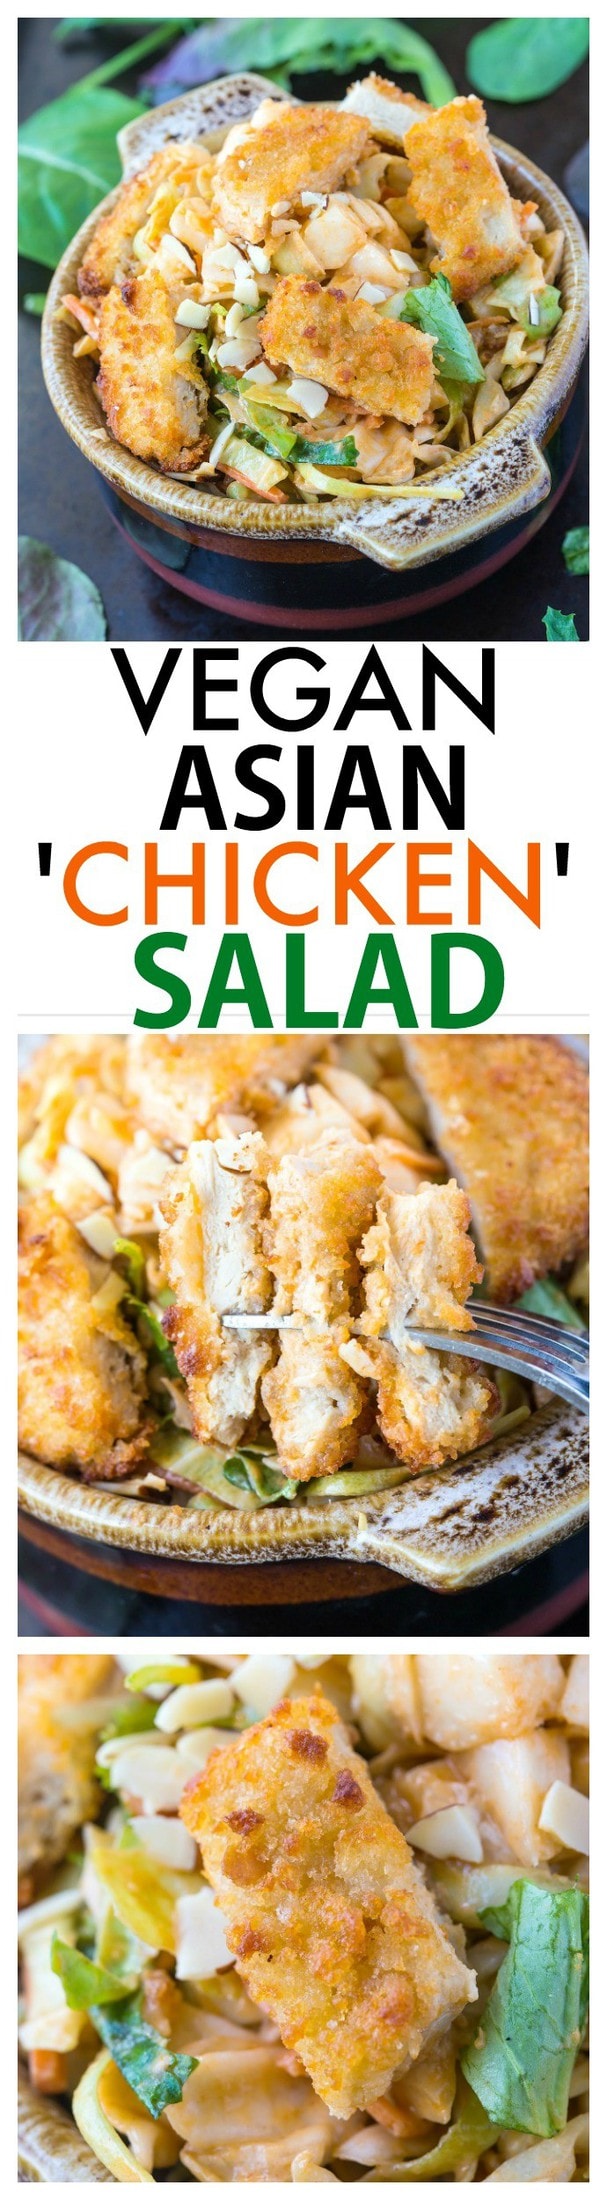 Vegan Asian 'Chicken' Salad- Quick, easy and delicious, this 'chicken' salad will sway even the biggest carnivore- The dressing is AMAZING! {vegan, gluten free}